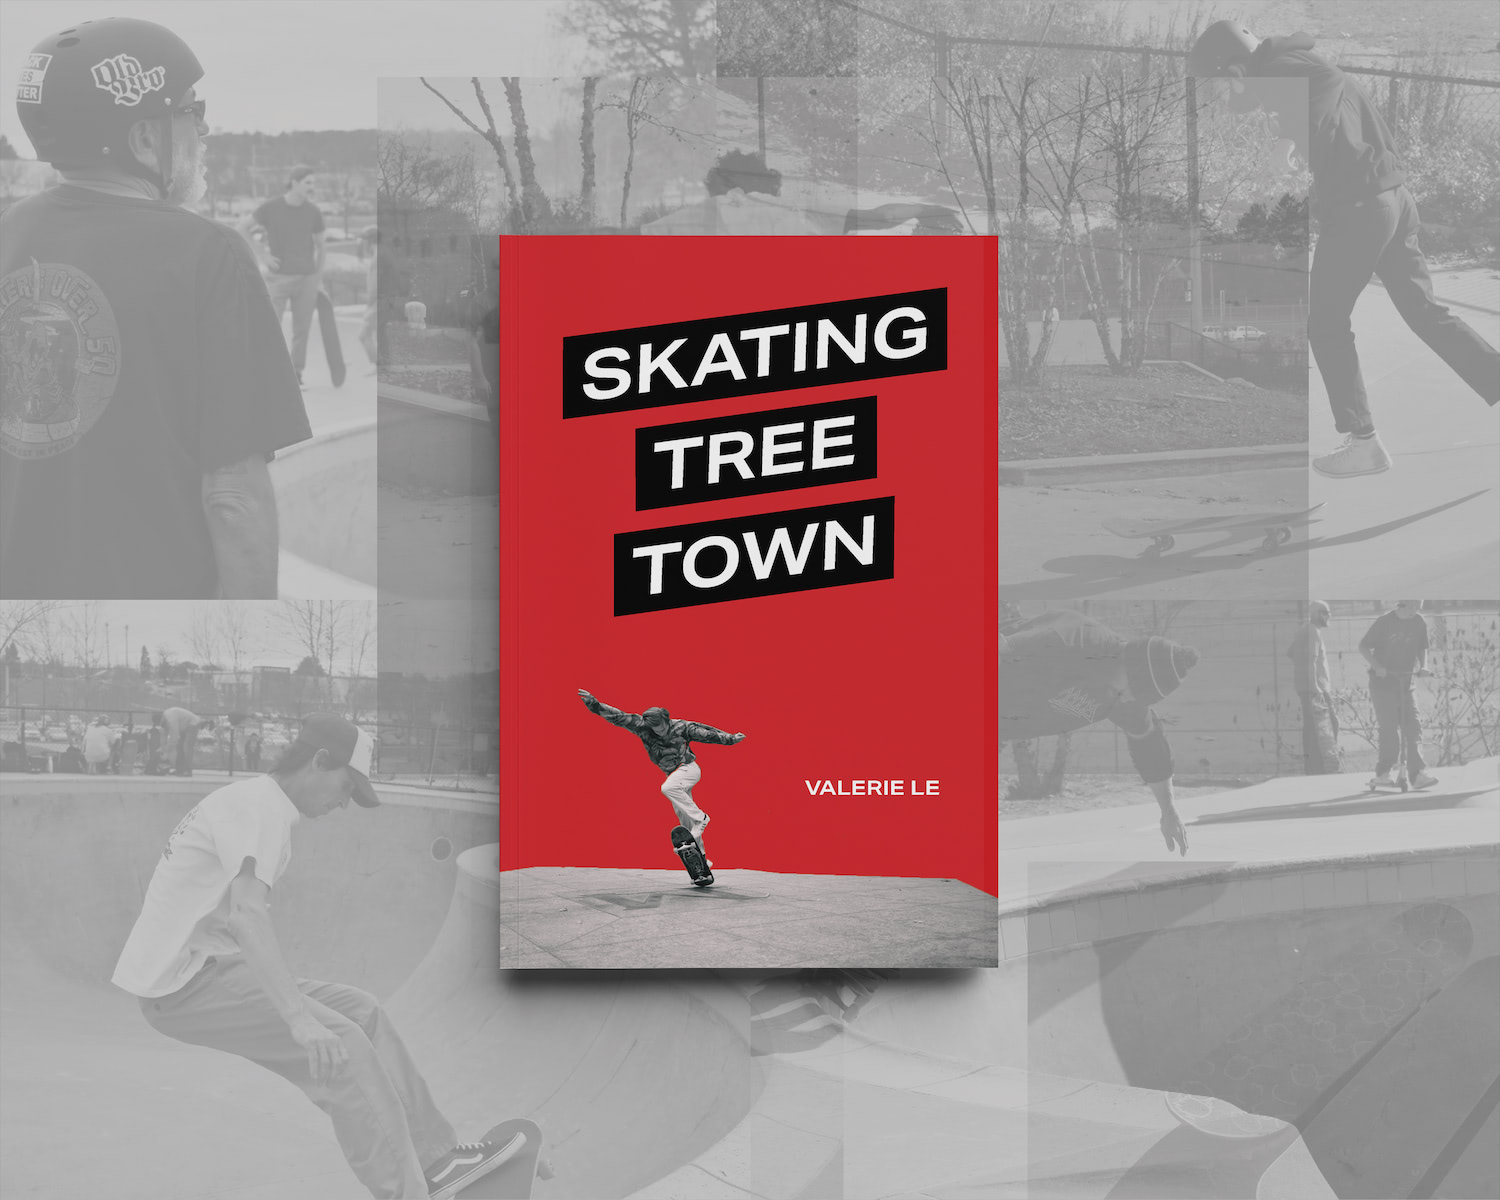 Red Skating Tree Town book set on a black and white collage of skateboarding photos.